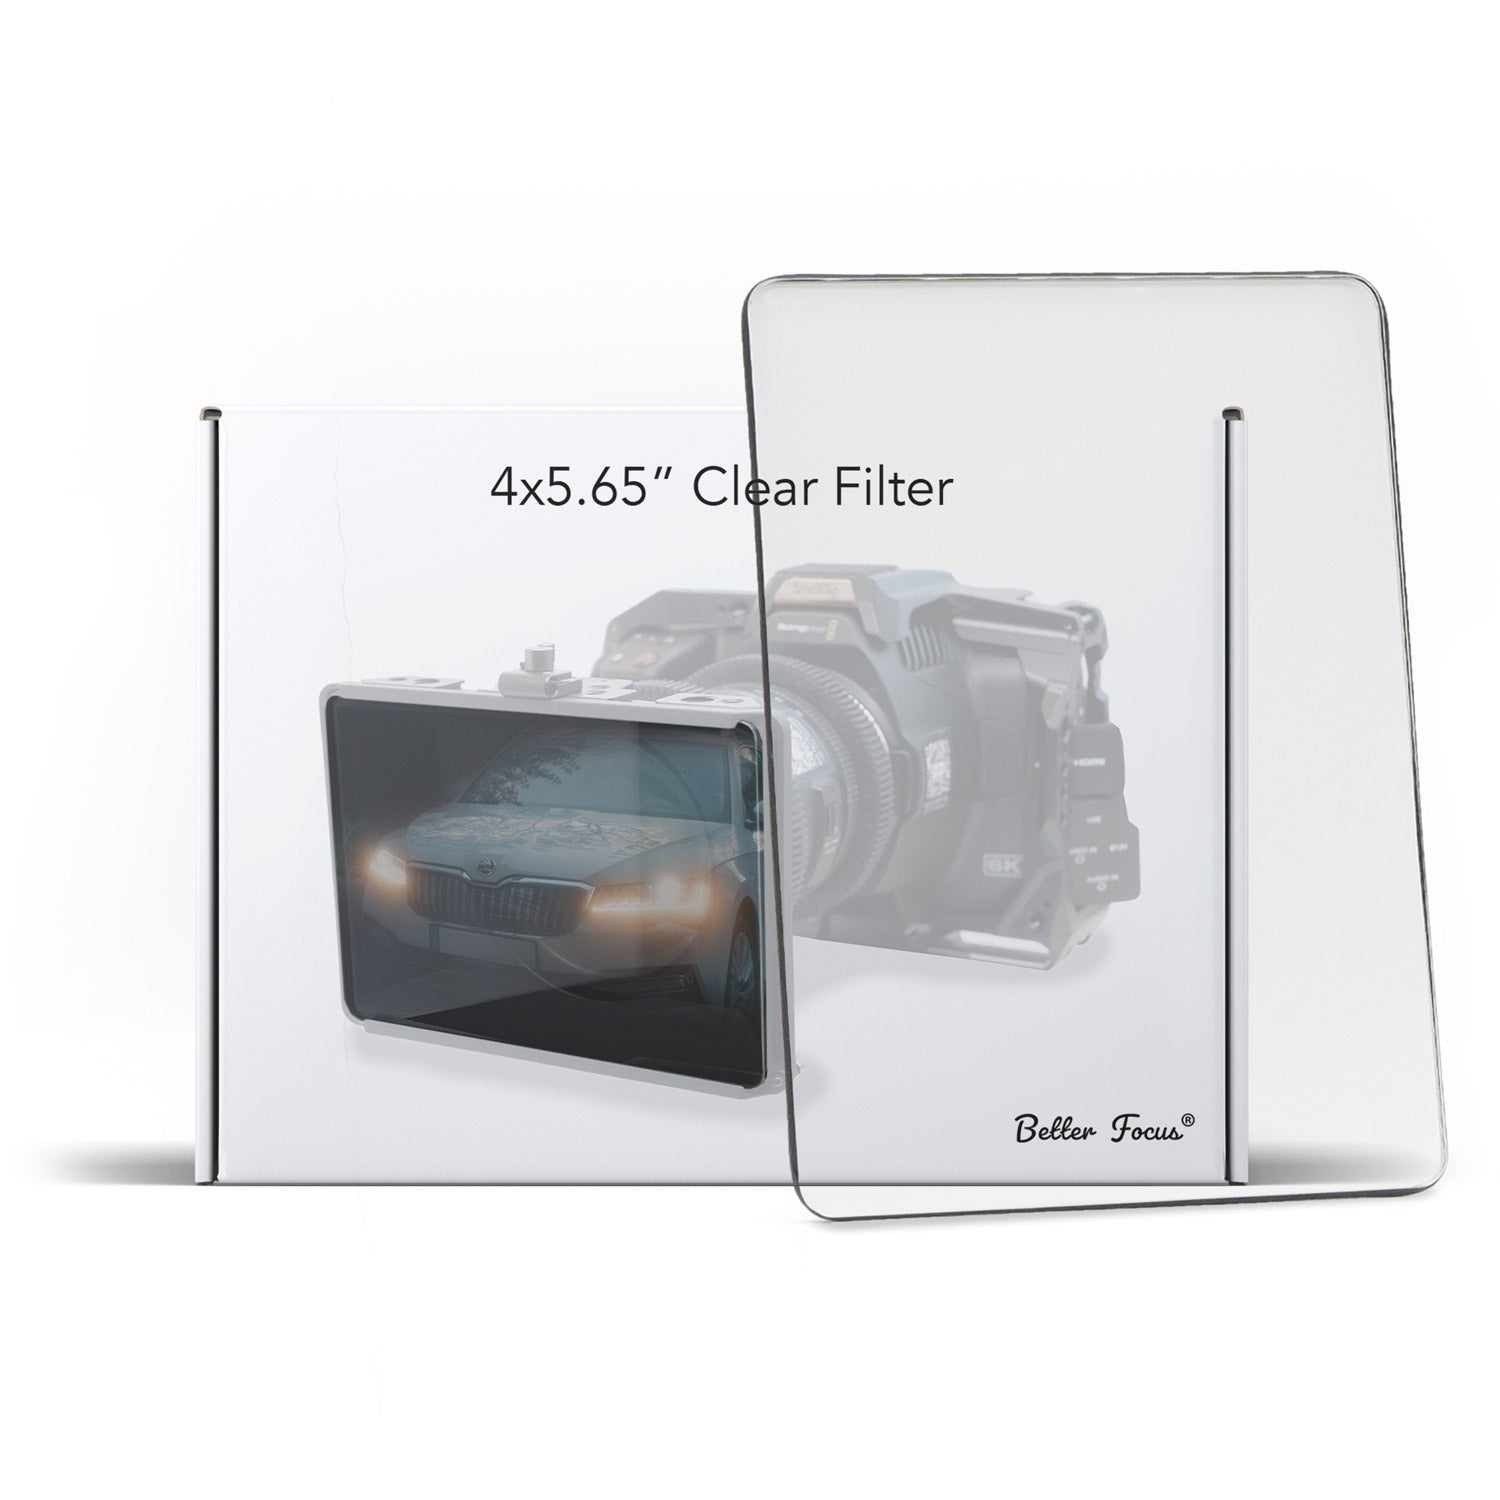 4x5.65" Clearfilter for Mattebox